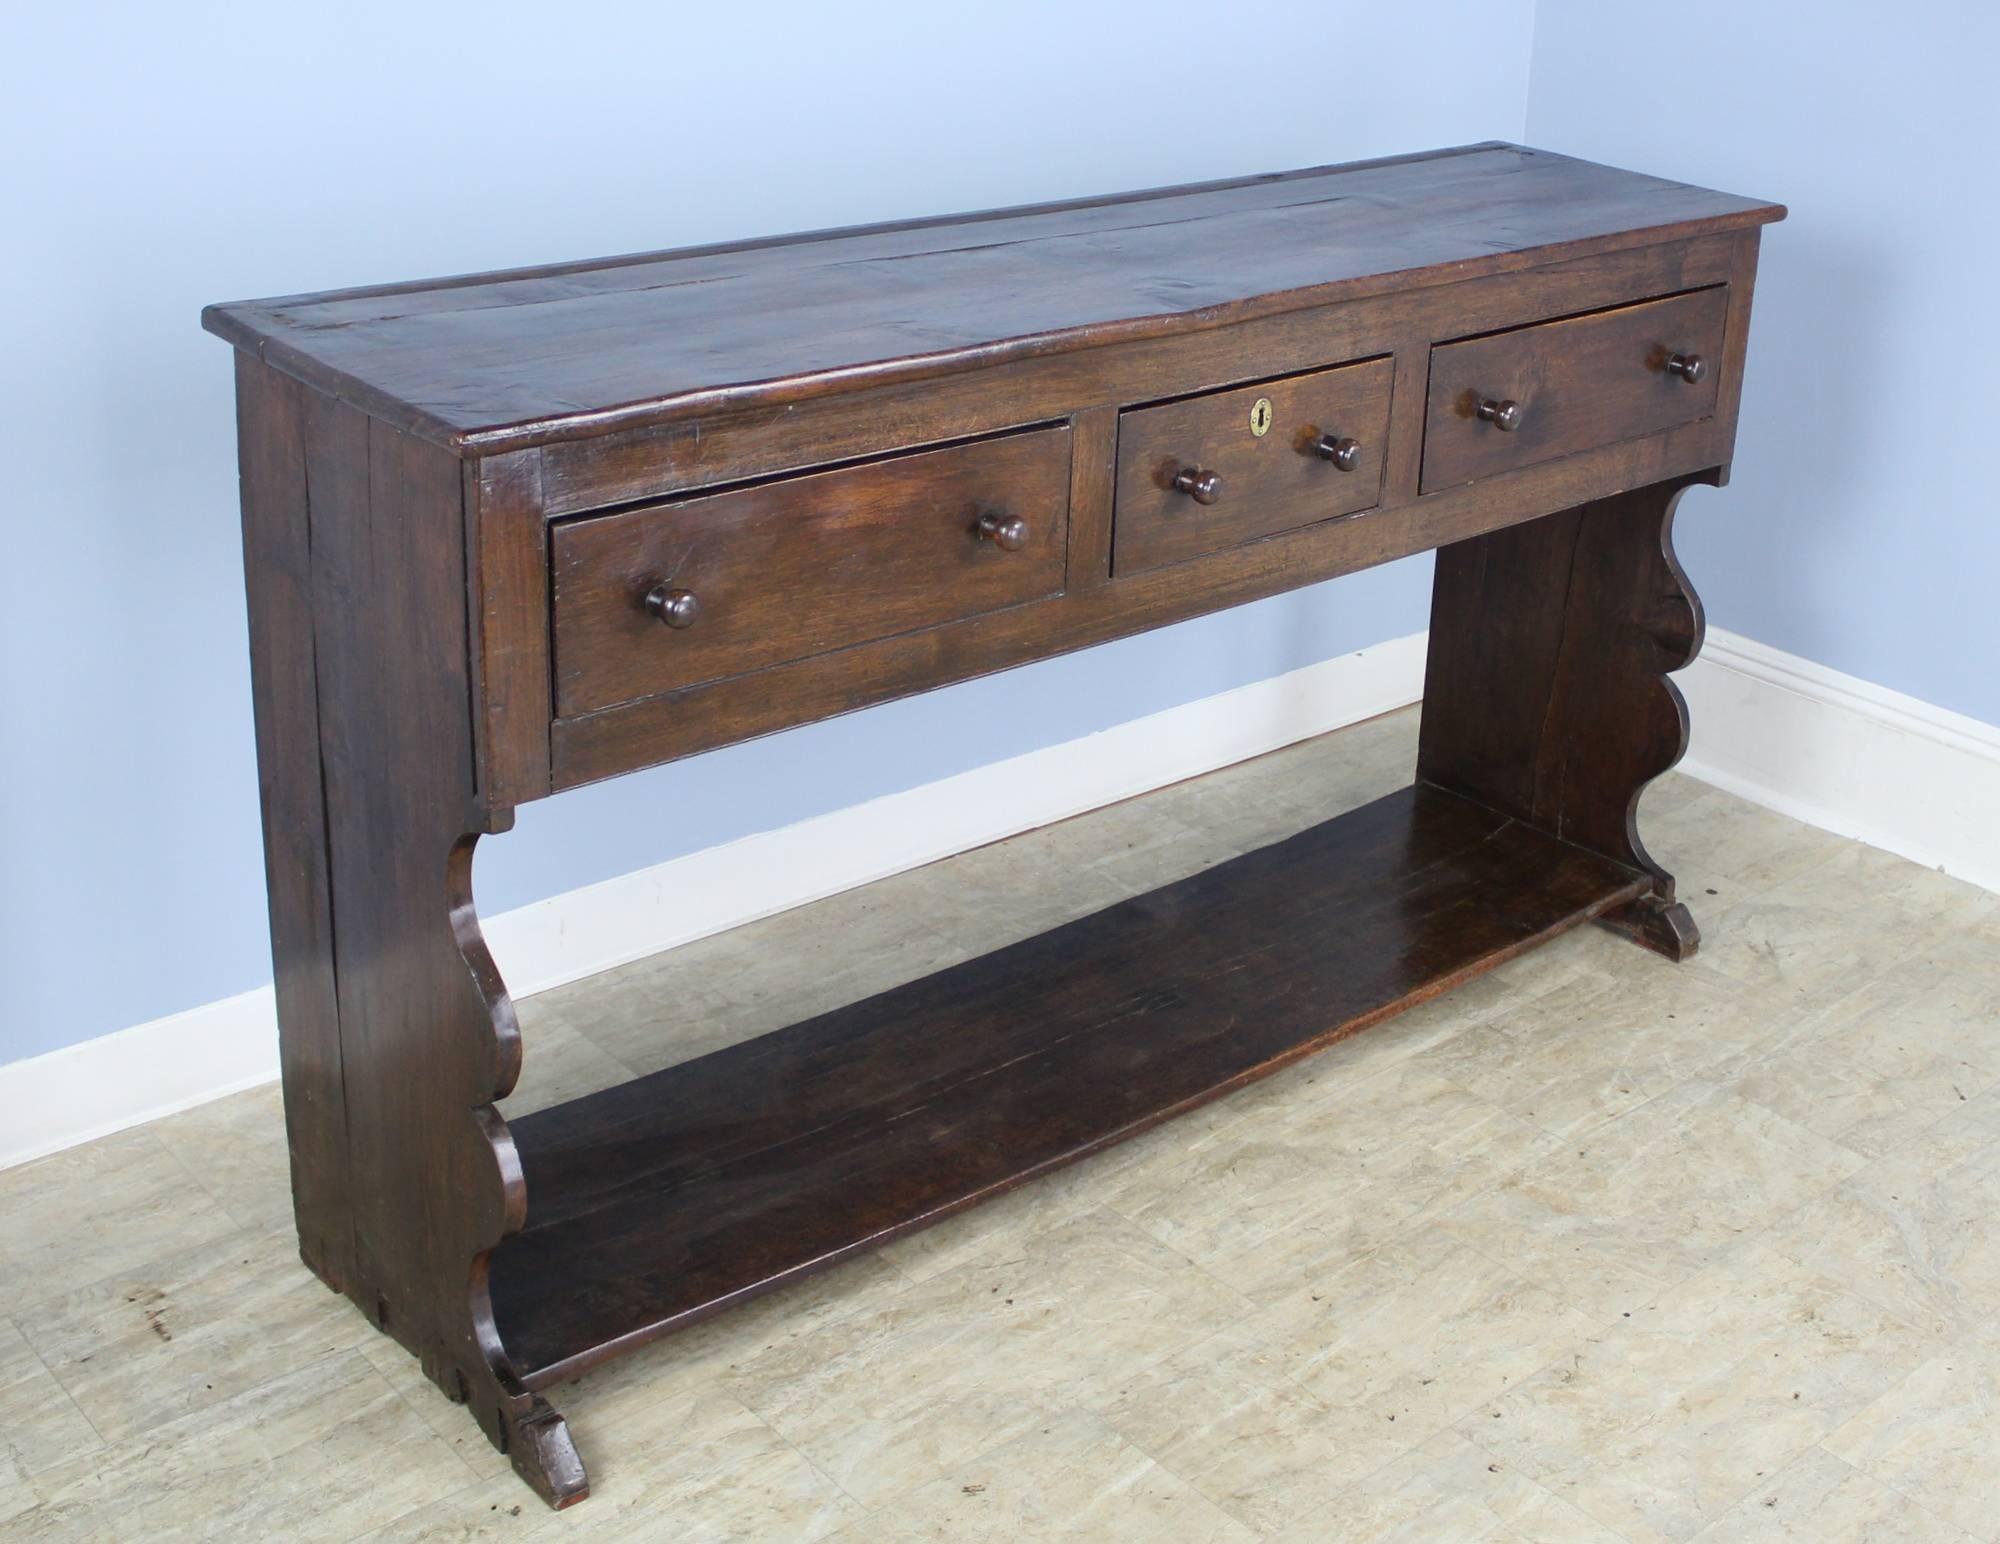 An early Welsh oak server with fancifully figured sides, roomy drawers and an extravagantly grained top. Lovely color and patina. The pot board below provides good storage.